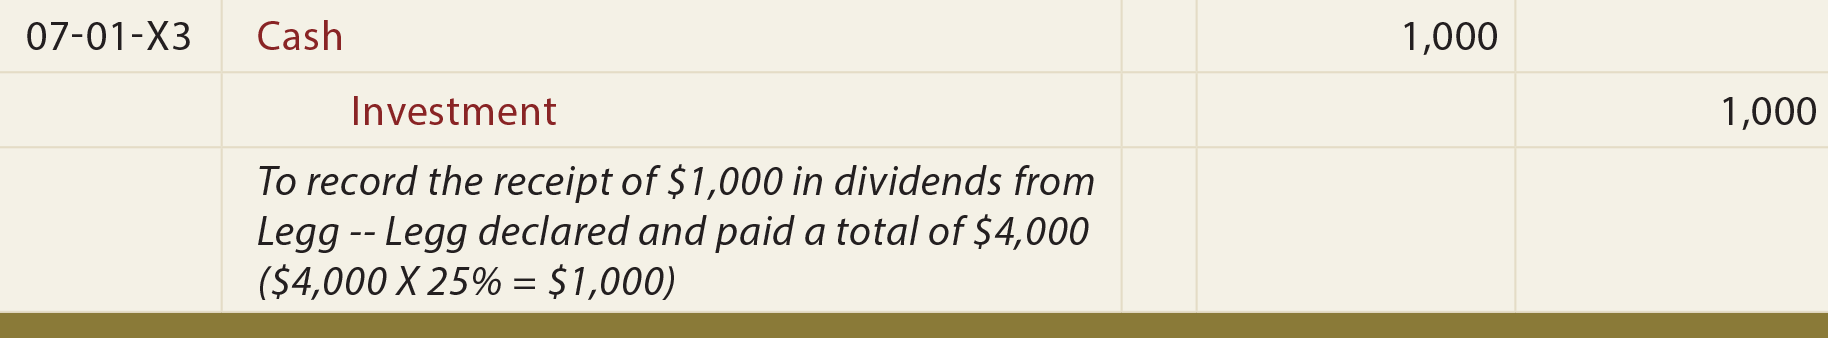 Investments - Equity Method General Journal Entry - To record the receipt of dividends